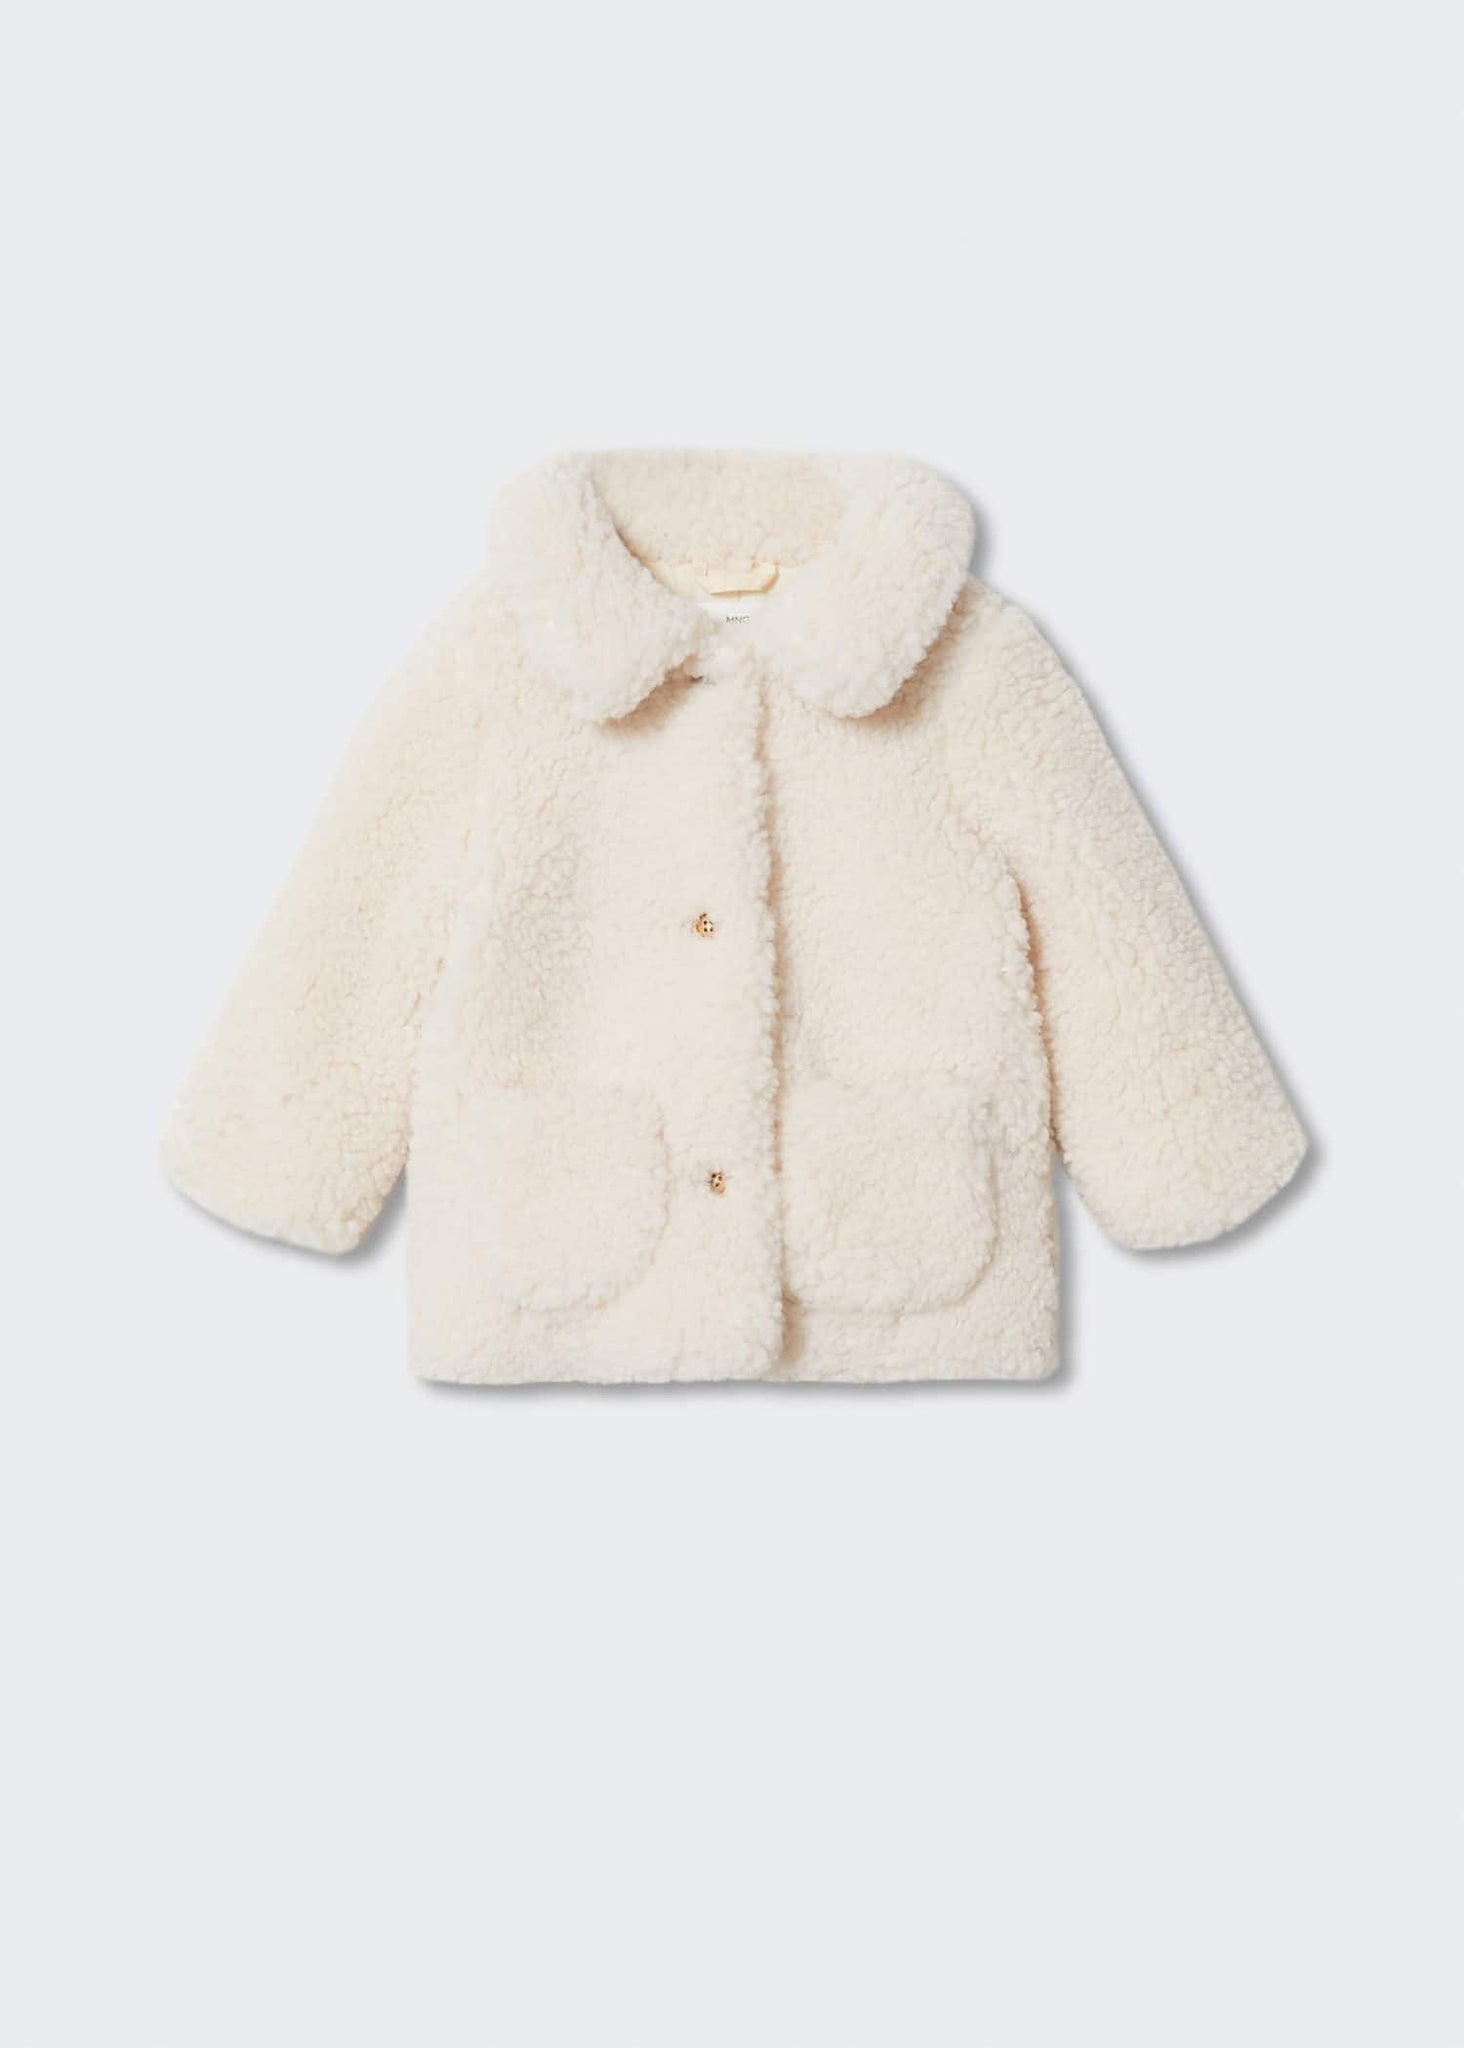 Faux shearling coat - Article without model